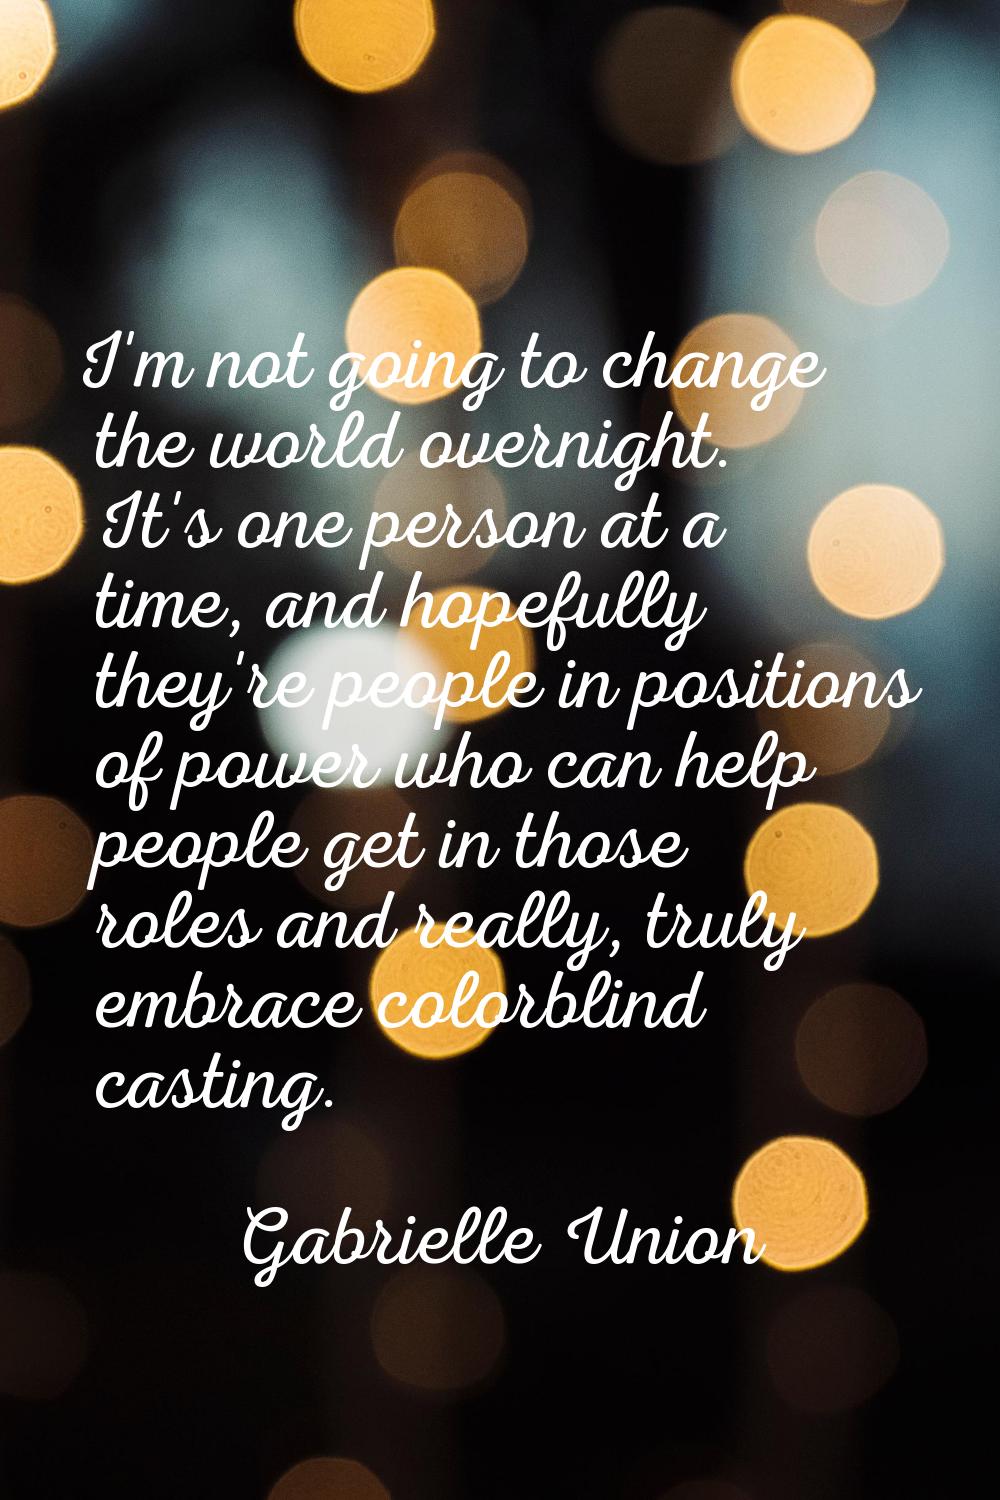 I'm not going to change the world overnight. It's one person at a time, and hopefully they're peopl